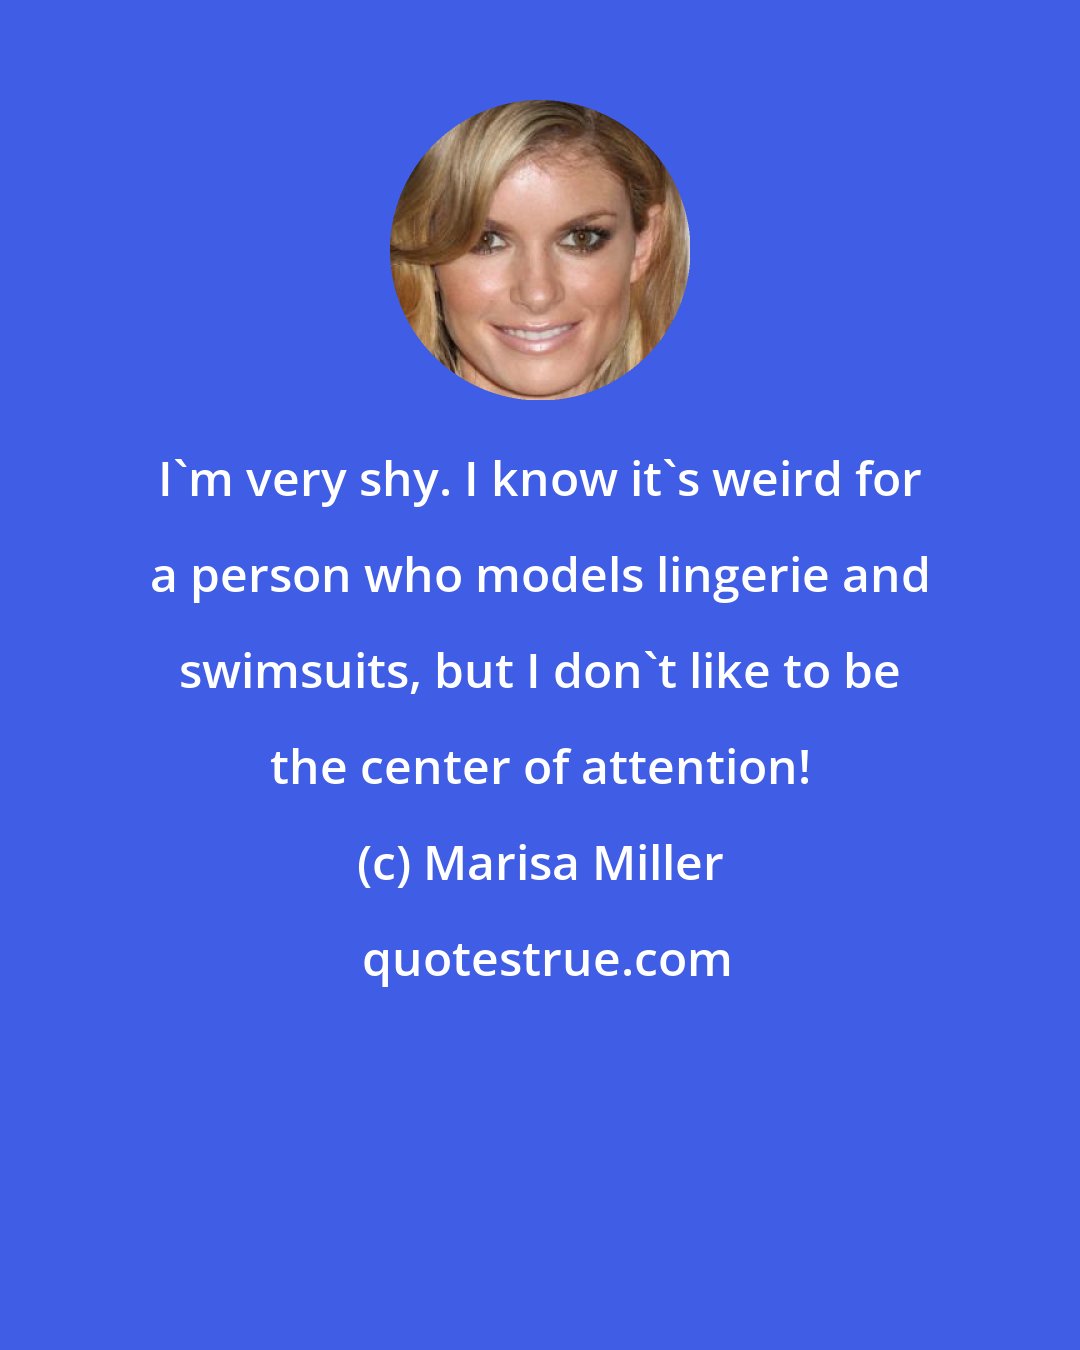 Marisa Miller: I'm very shy. I know it's weird for a person who models lingerie and swimsuits, but I don't like to be the center of attention!